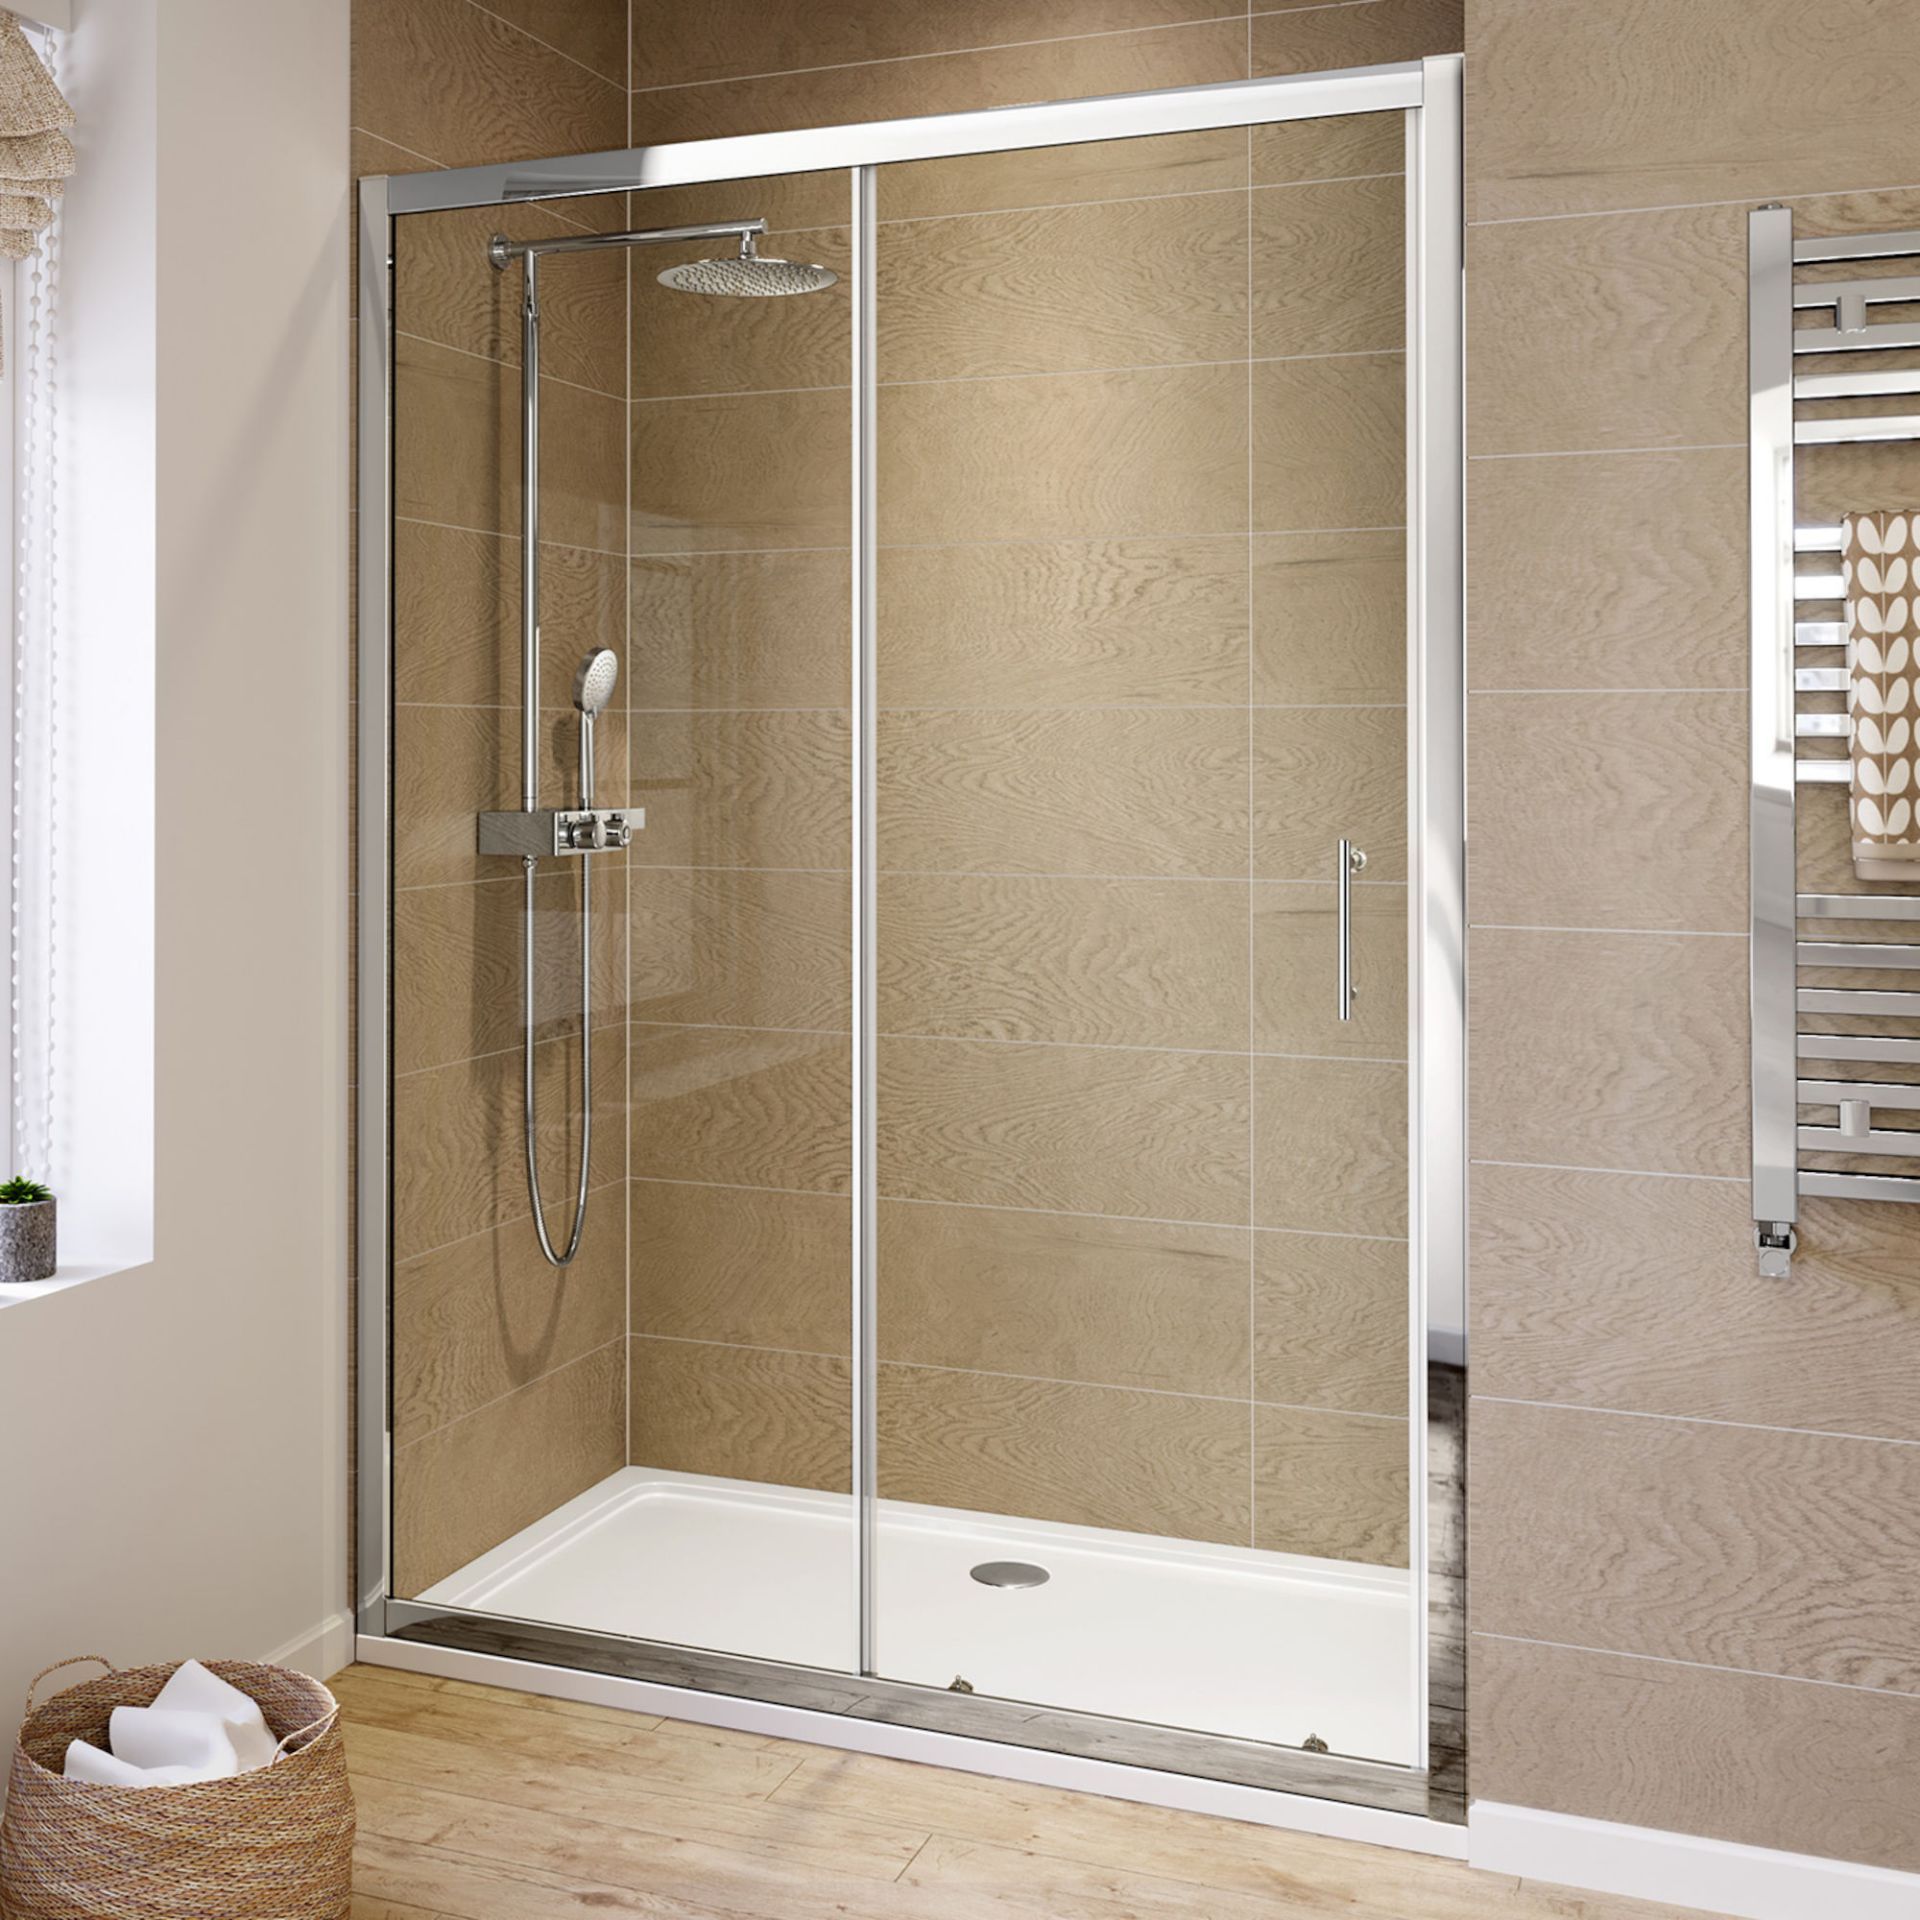 New (Aa17) 1500mm - 6mm - Elements Sliding Shower Door. RRP £299.99.6mm Safety Glass Fully W...